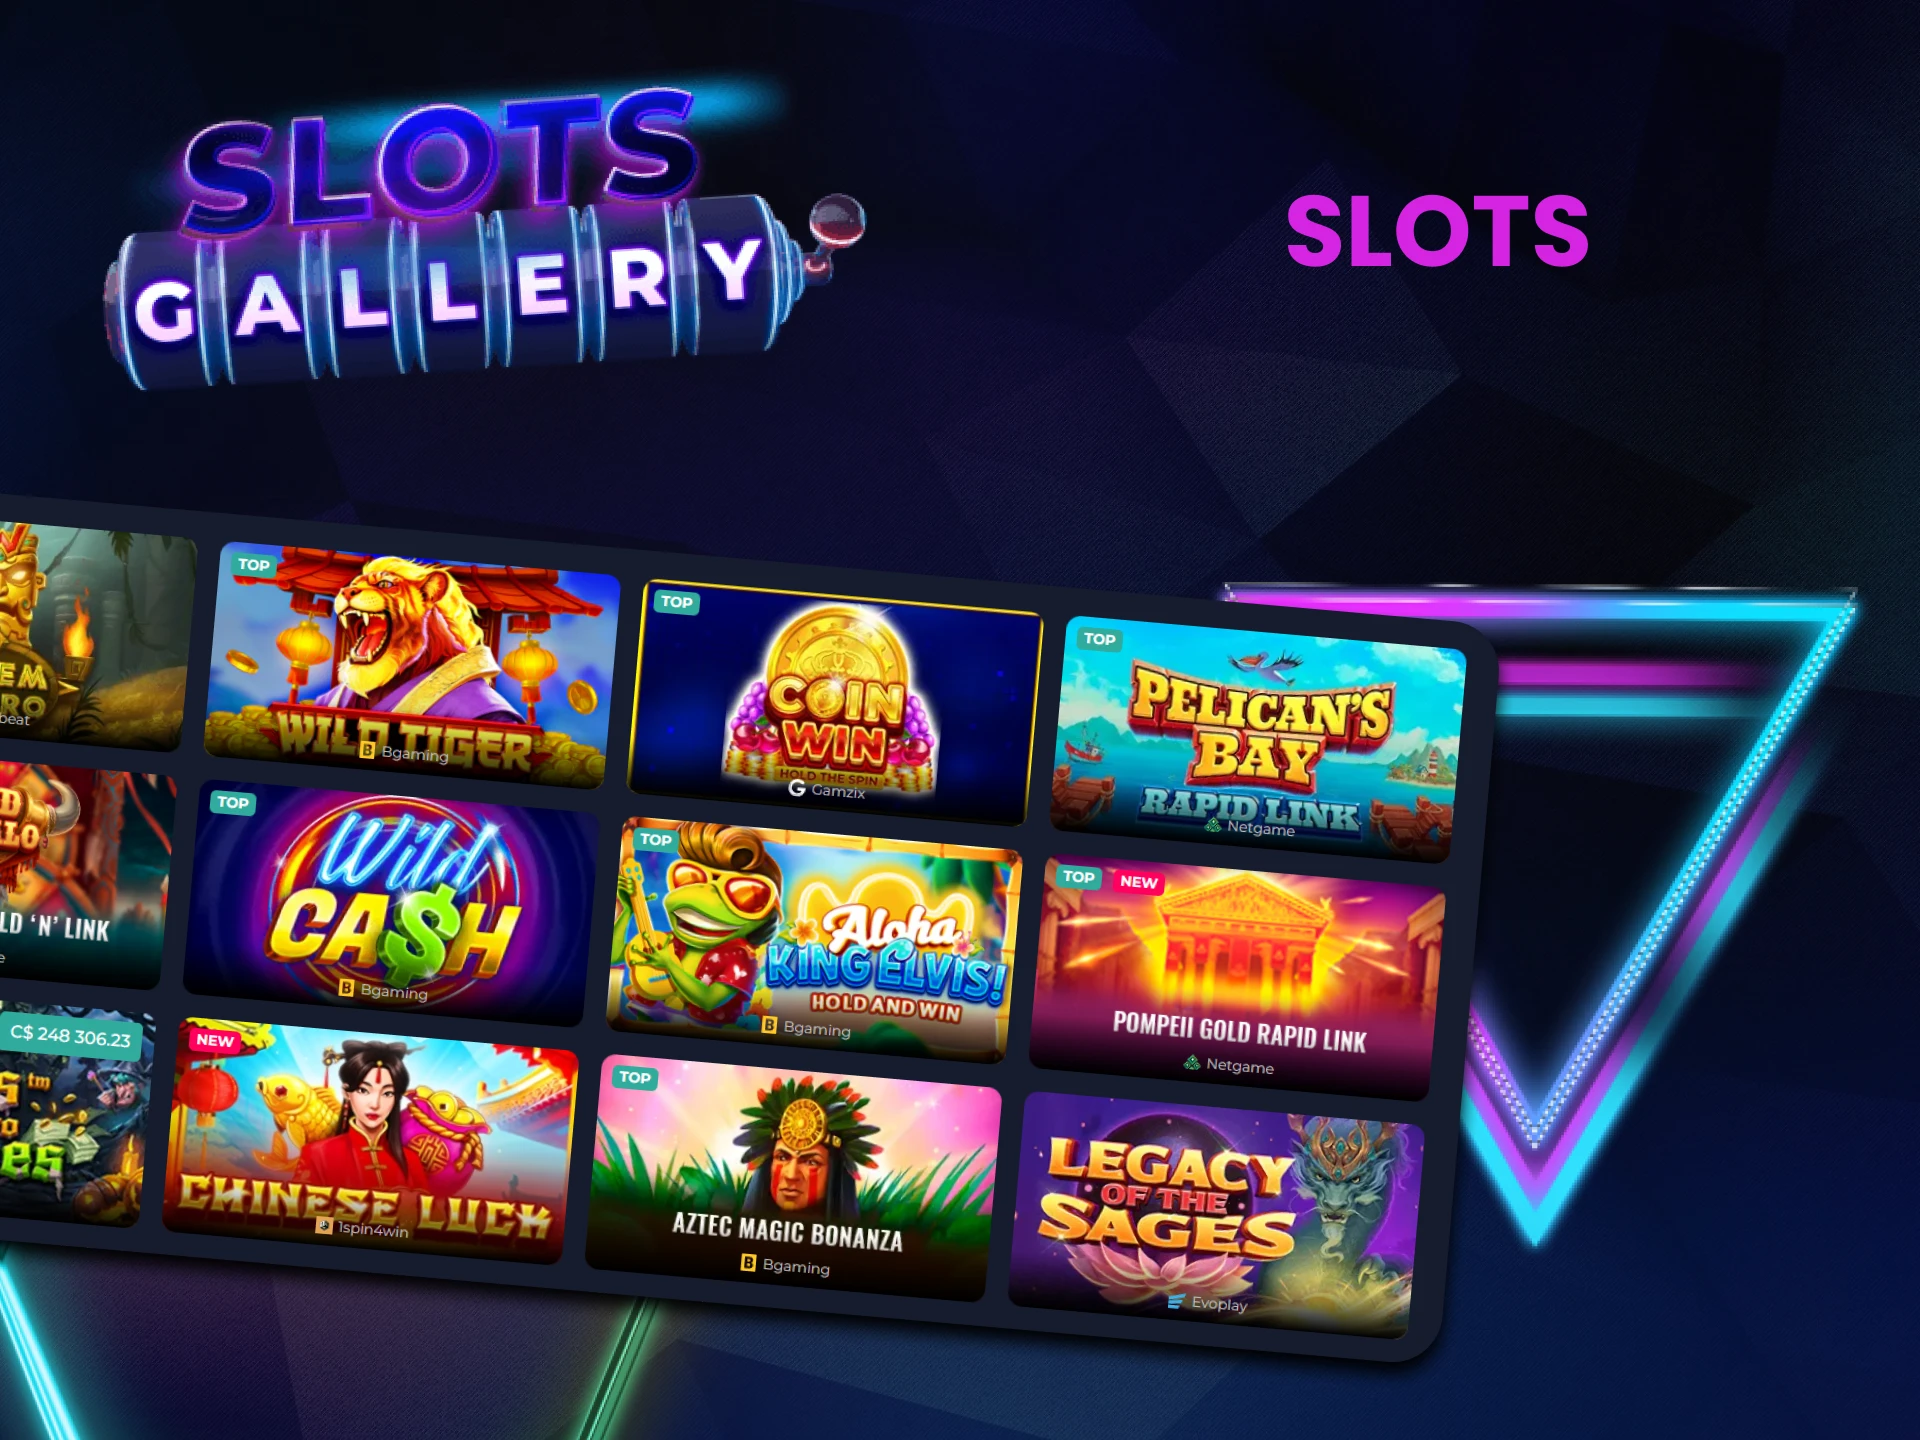 For casino games from SlotsGallery, choose the Slots section.